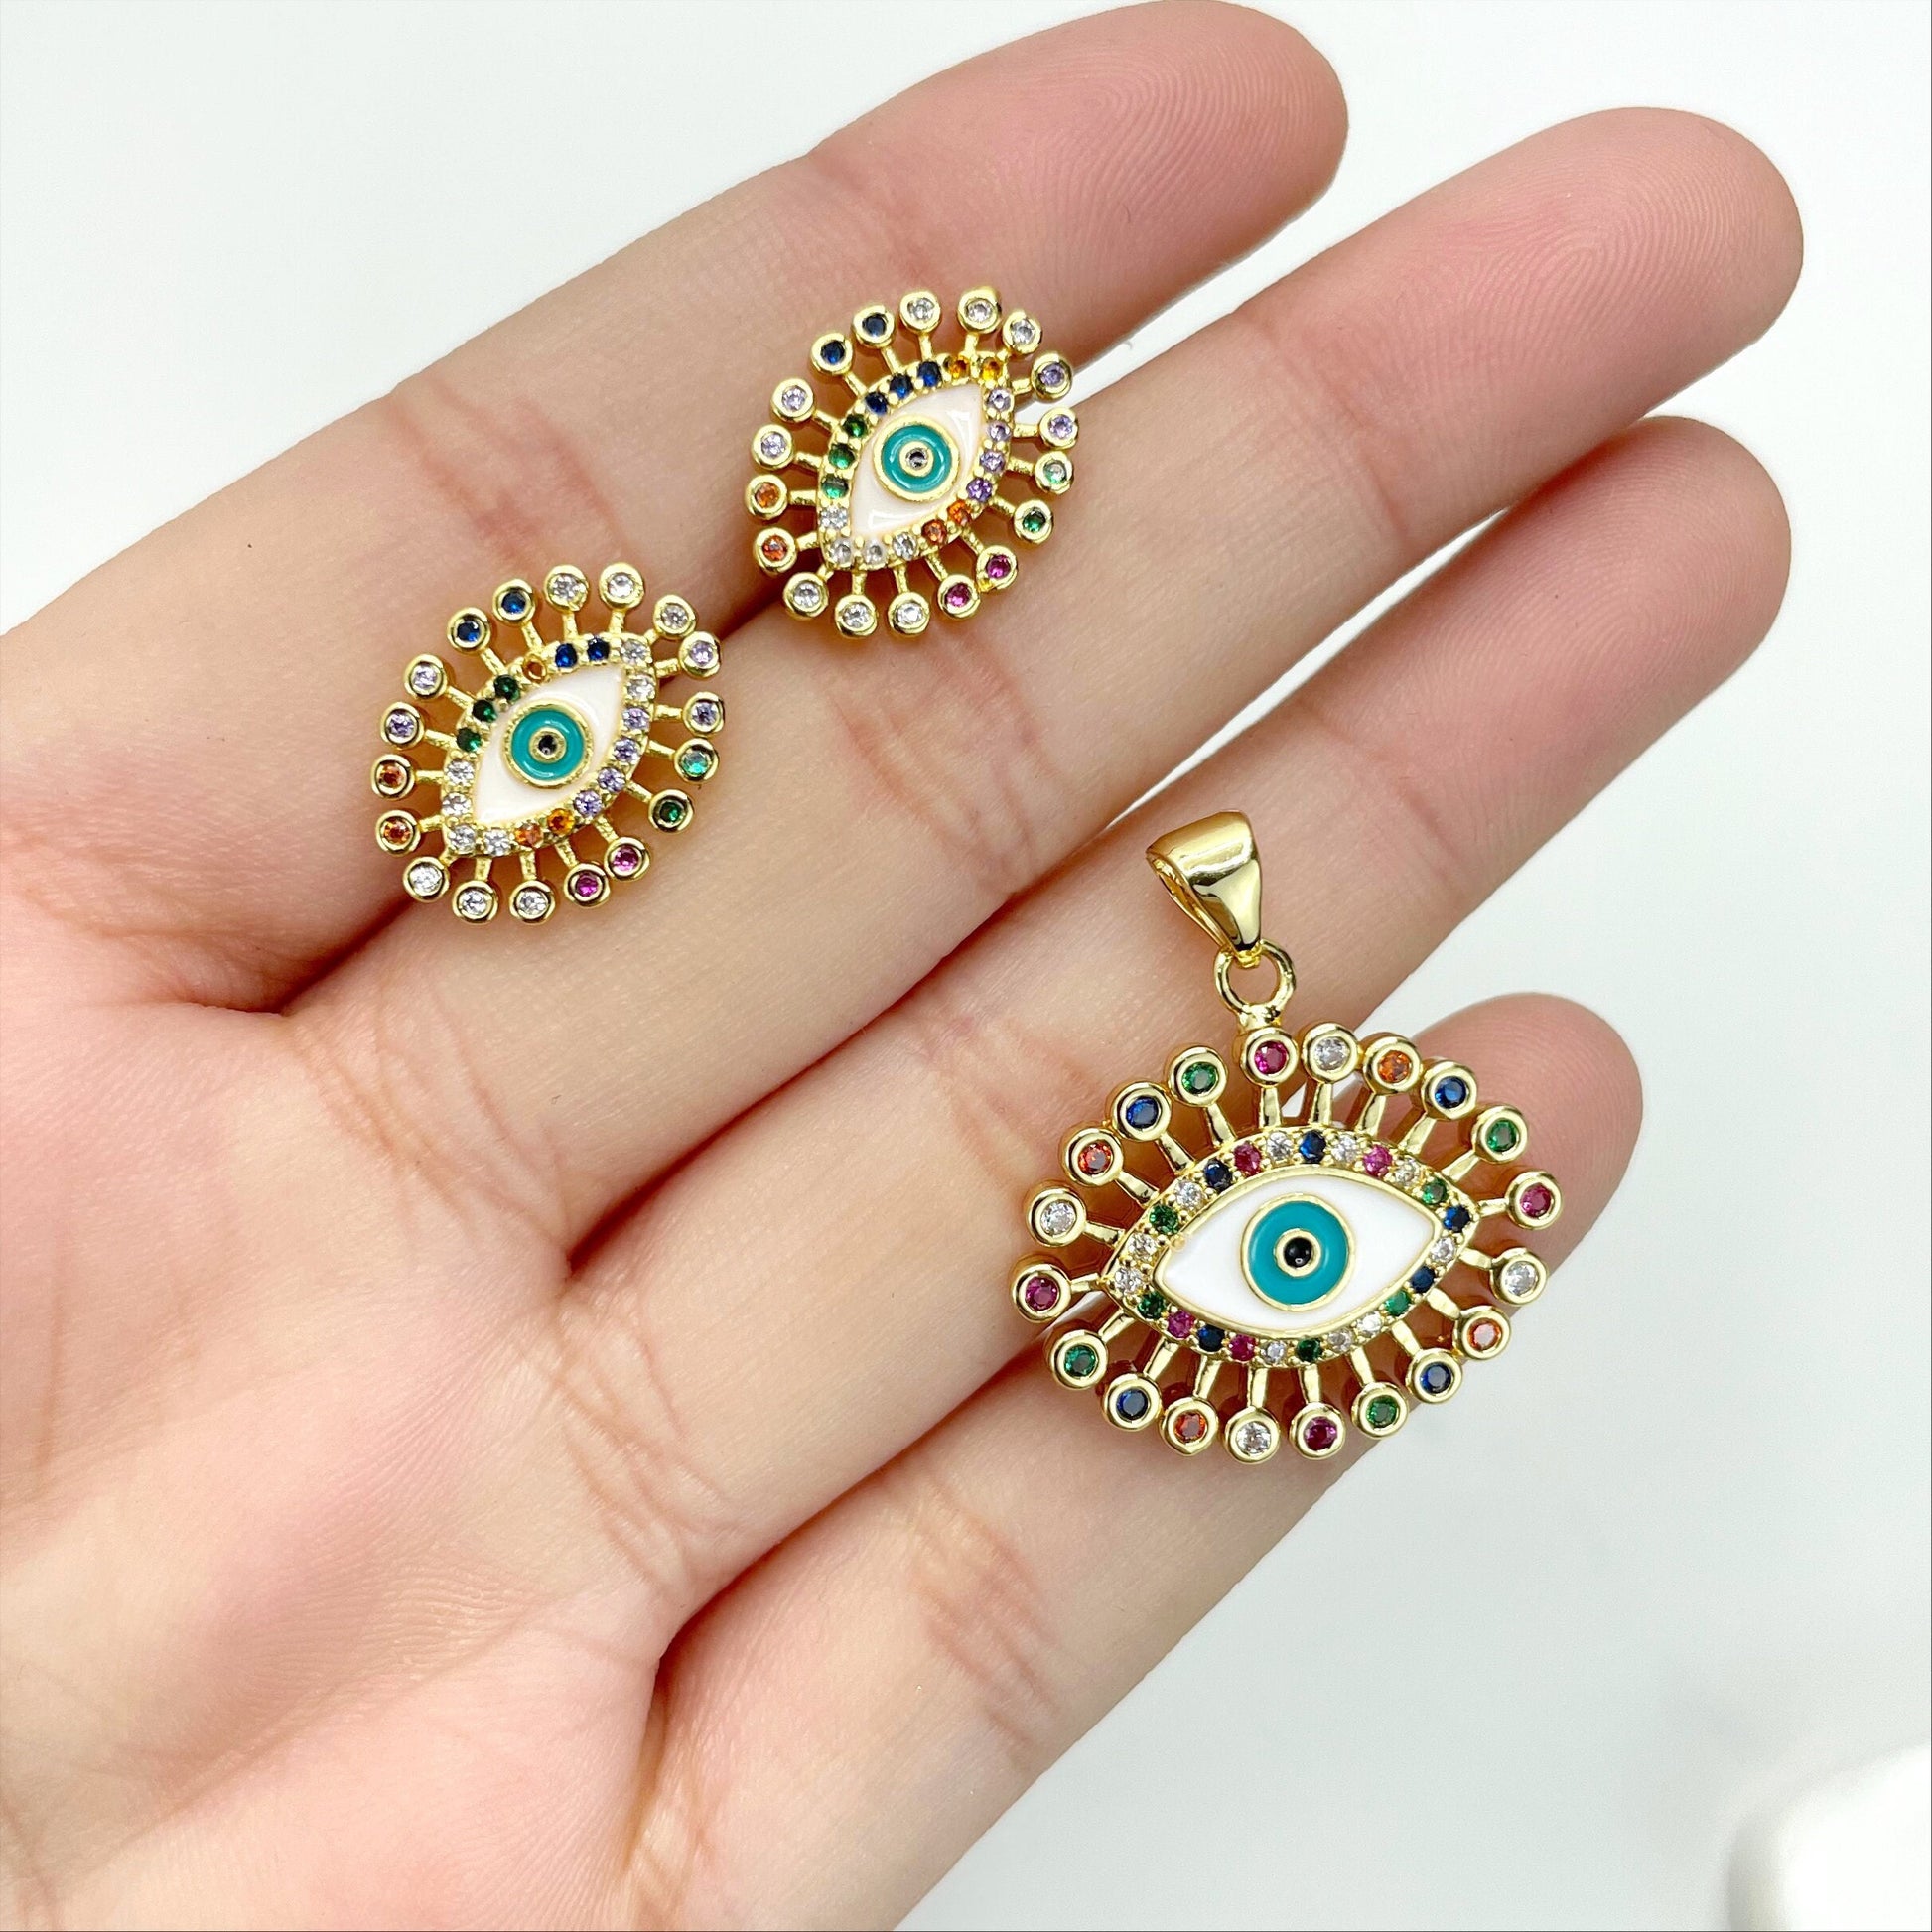 18k Gold Filled Colored Enamel & Cubic Zirconia Evil Eyes, 15mm Earrings and 23mm Pendant Charms Wholesale Jewelry Making Supplies